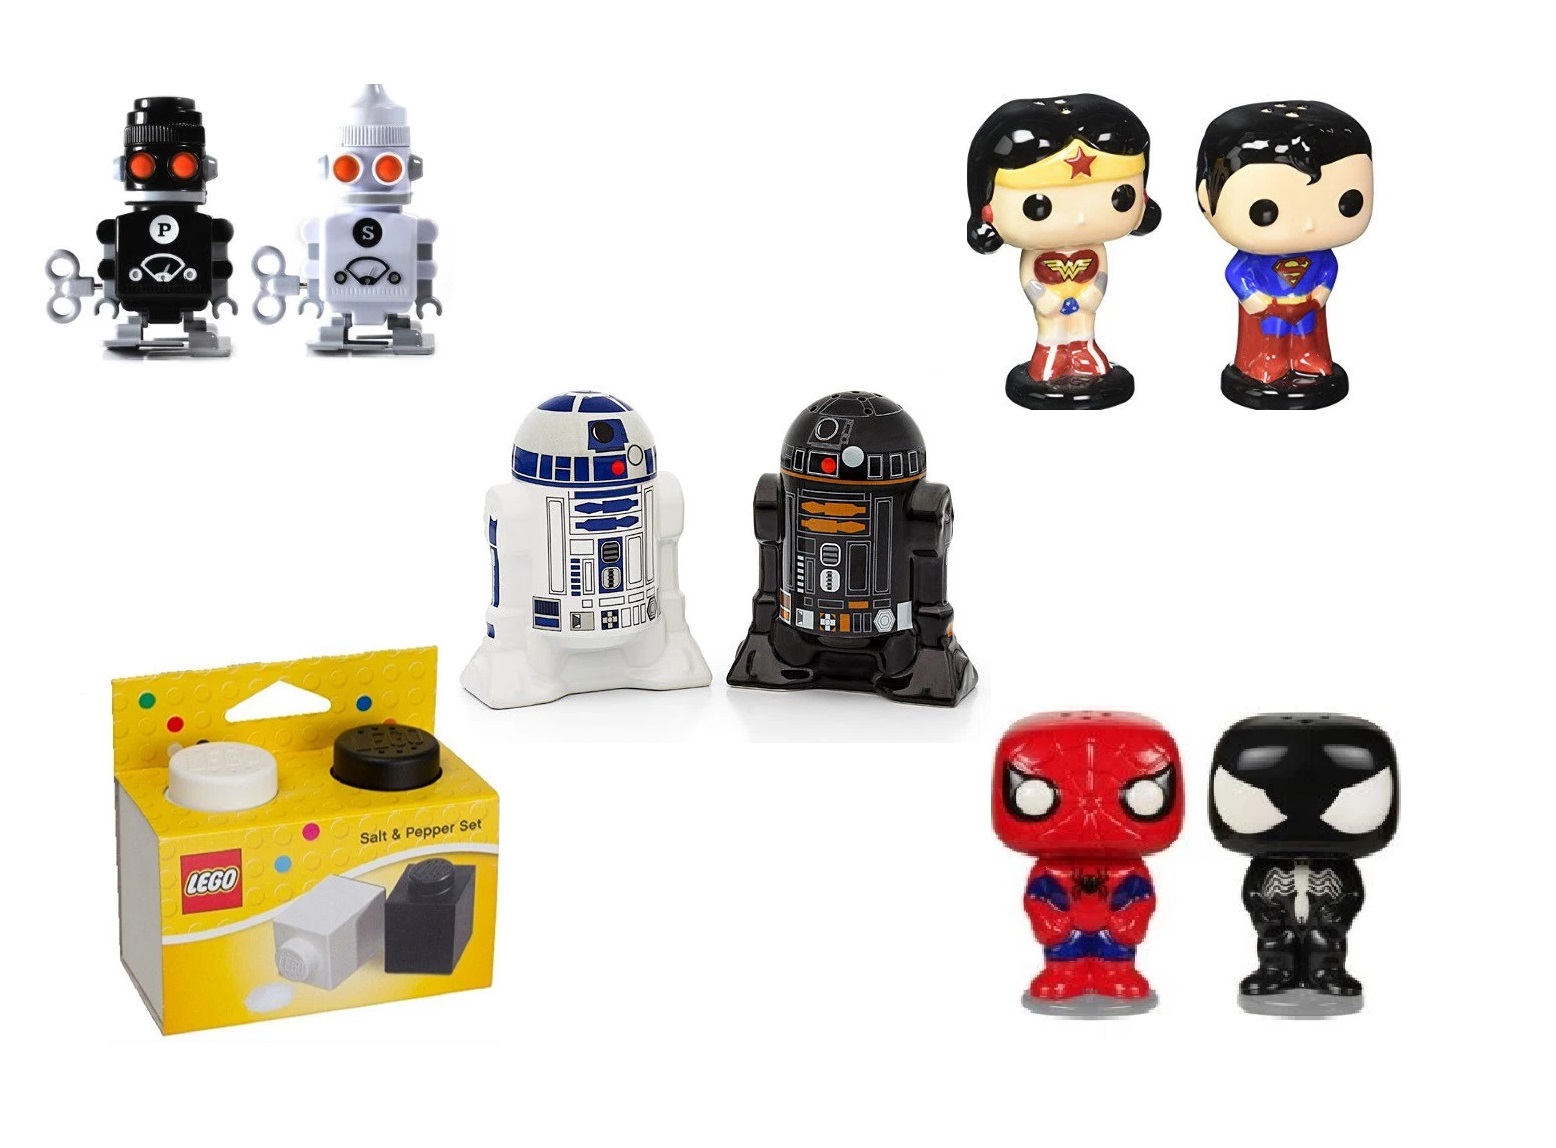 Top 10 Amazing, Nerdy and Unusual Salt & Pepper Shakers